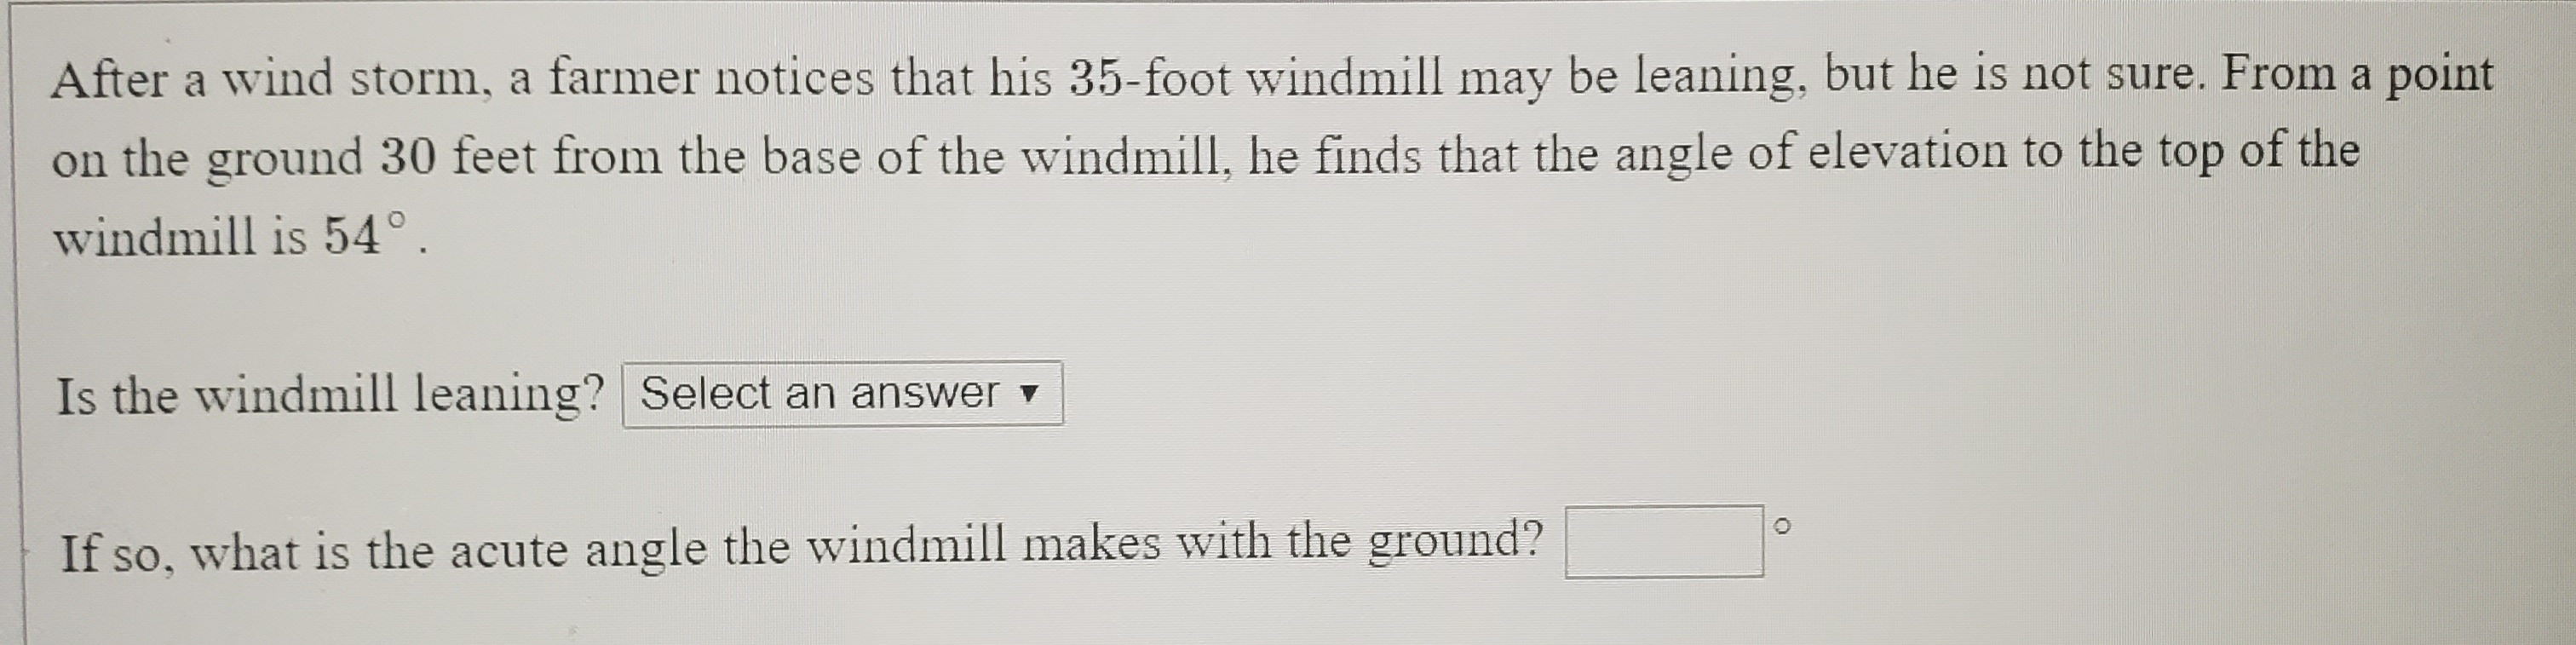 After a wind storm, a farmer notices that his 35-foot windmill may be leaning, but he is not sure. From a point
on the ground 30 feet from the base of the windmill, he finds that the angle of elevation to the top of the
windmill is 54°.
Is the windmill leaning? Select an answer v
If so, what is the acute angle the windmill makes with the ground?
